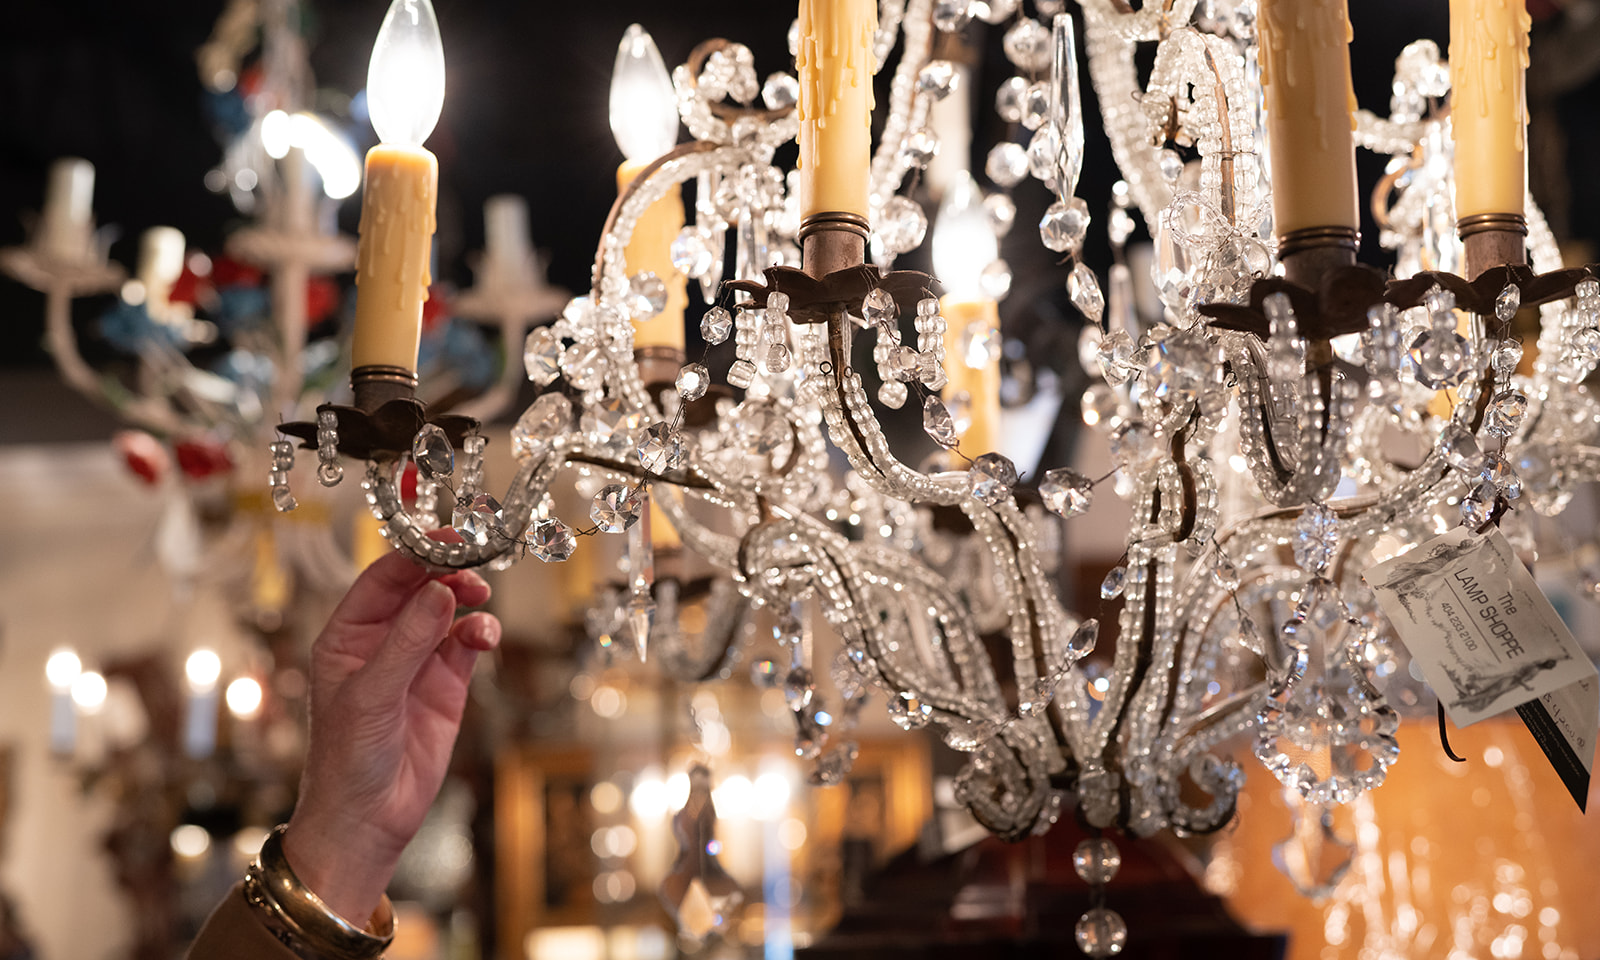 Antique chandeliers in crystal, bead, glass, wood and iron. The showroom has chandeliers for any style you choose, from elaborate and ornate to simple and stunning